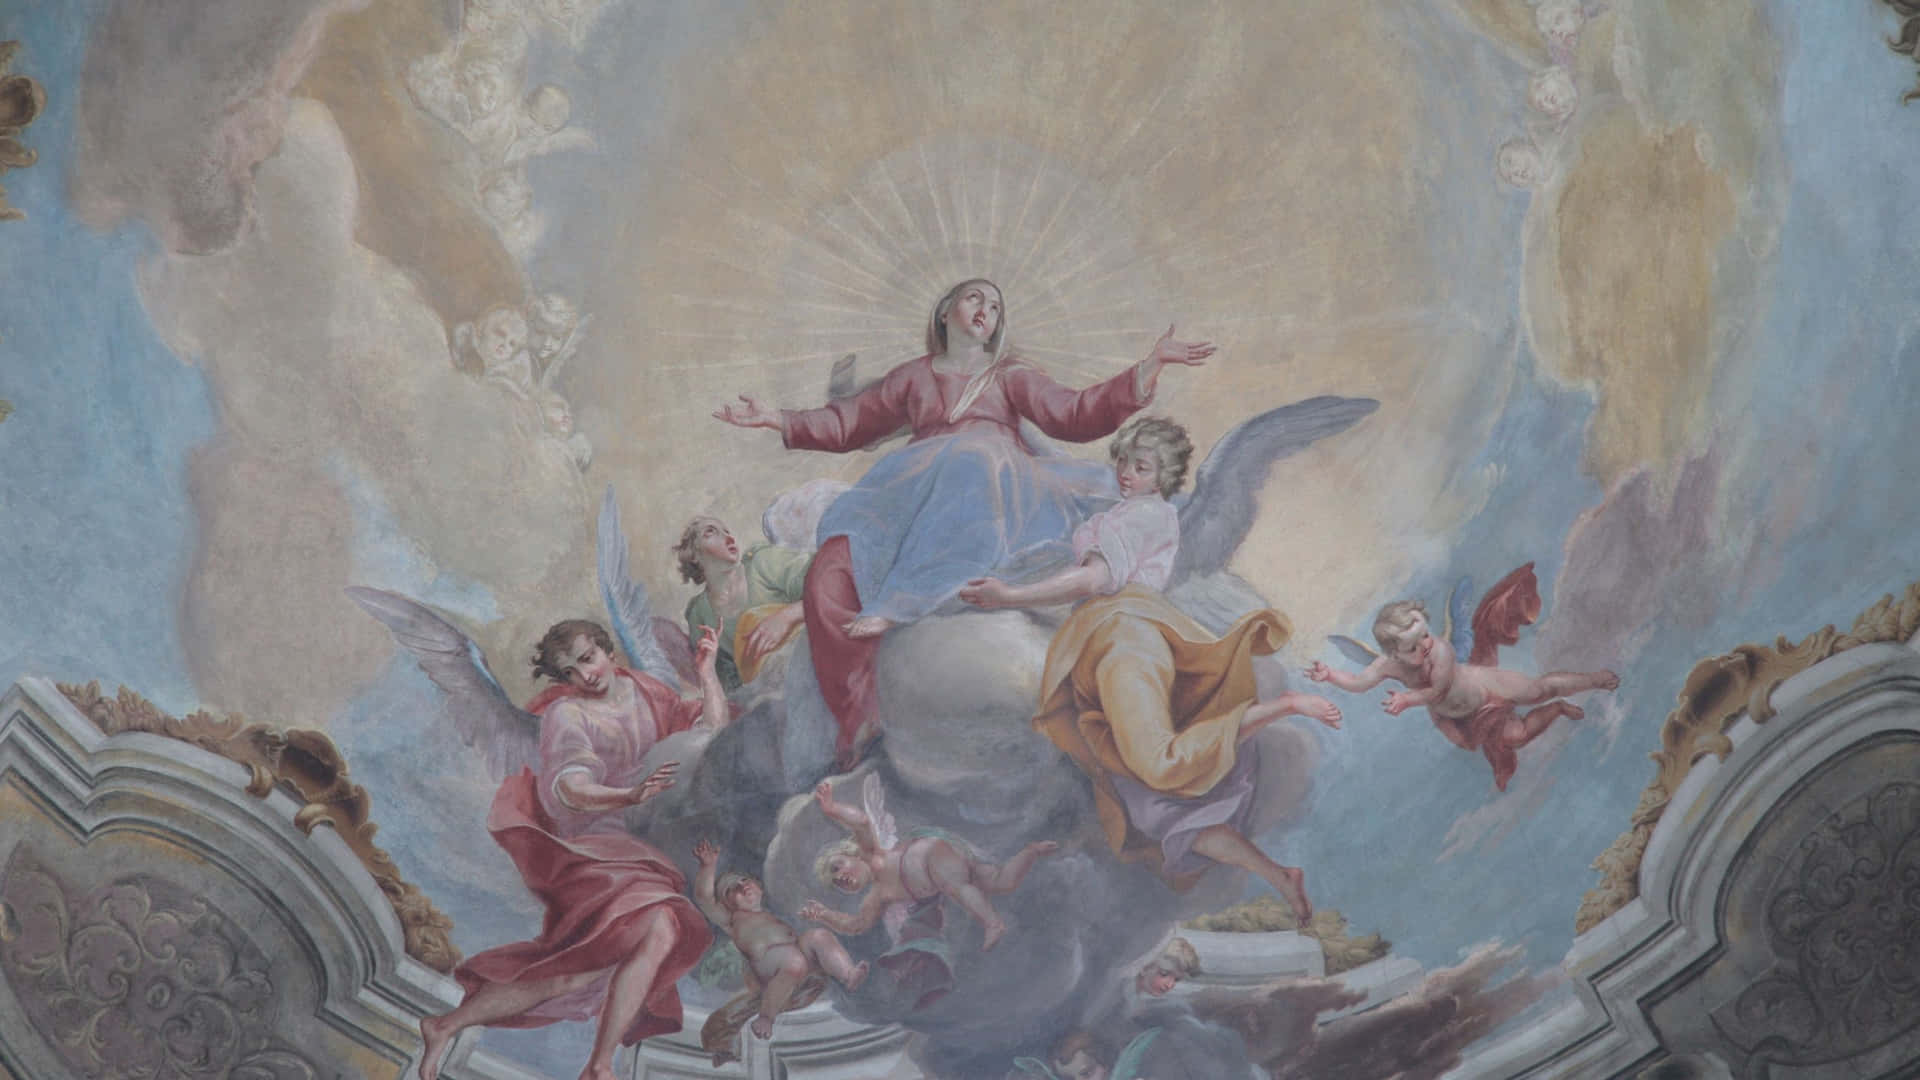 The Ceiling Of A Church With Jesus And Angels